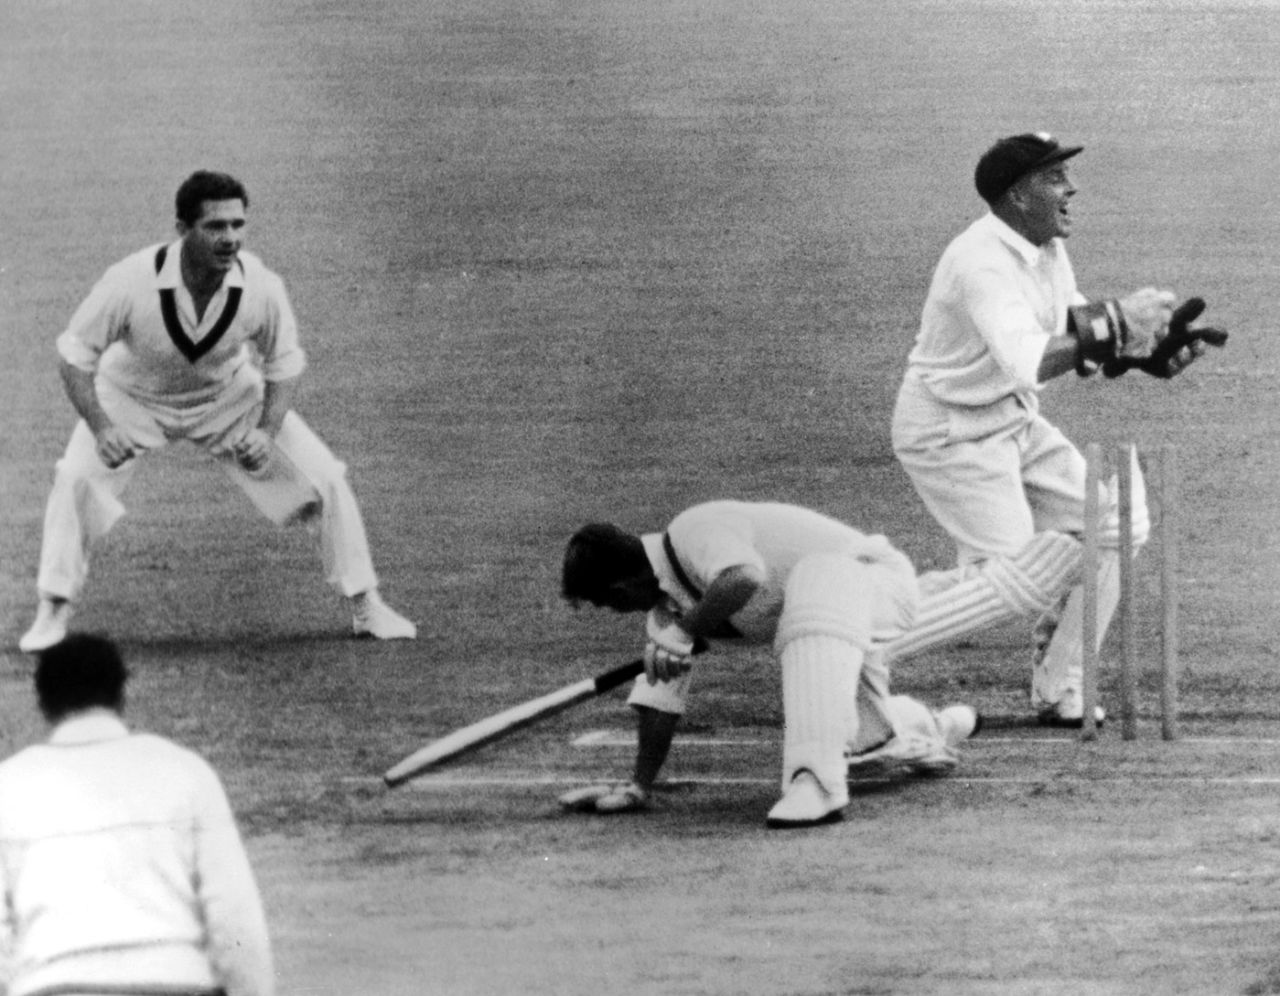 Wally Grout attempts to stump Roy Swetman, Australia v England, 3rd Test, Sydney, 2nd day, January 10, 1959